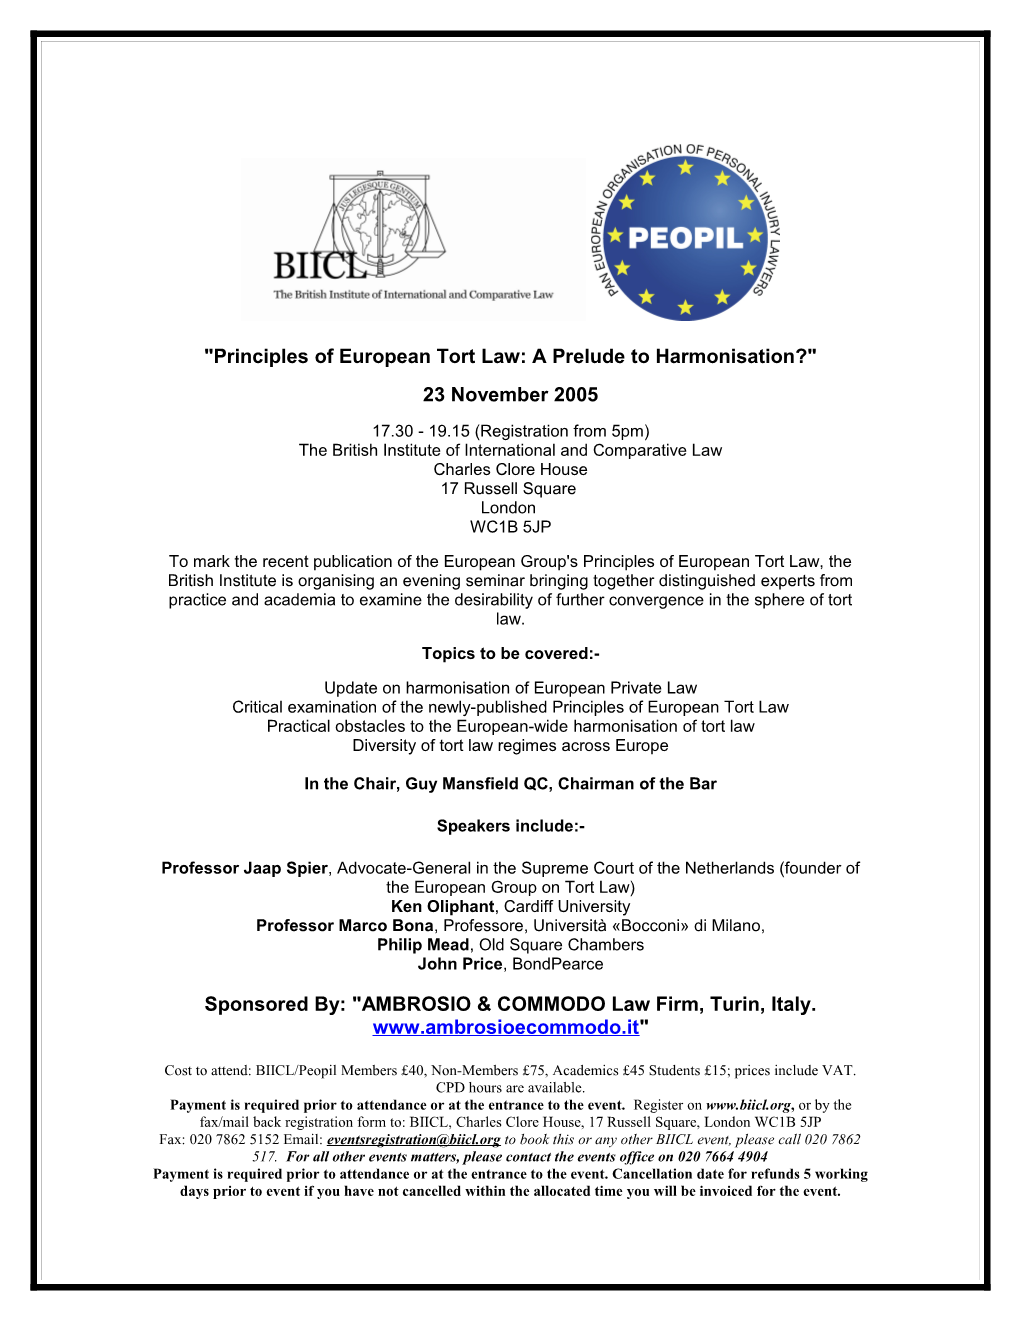 Principles of European Tort Law: a Prelude to Harmonisation?